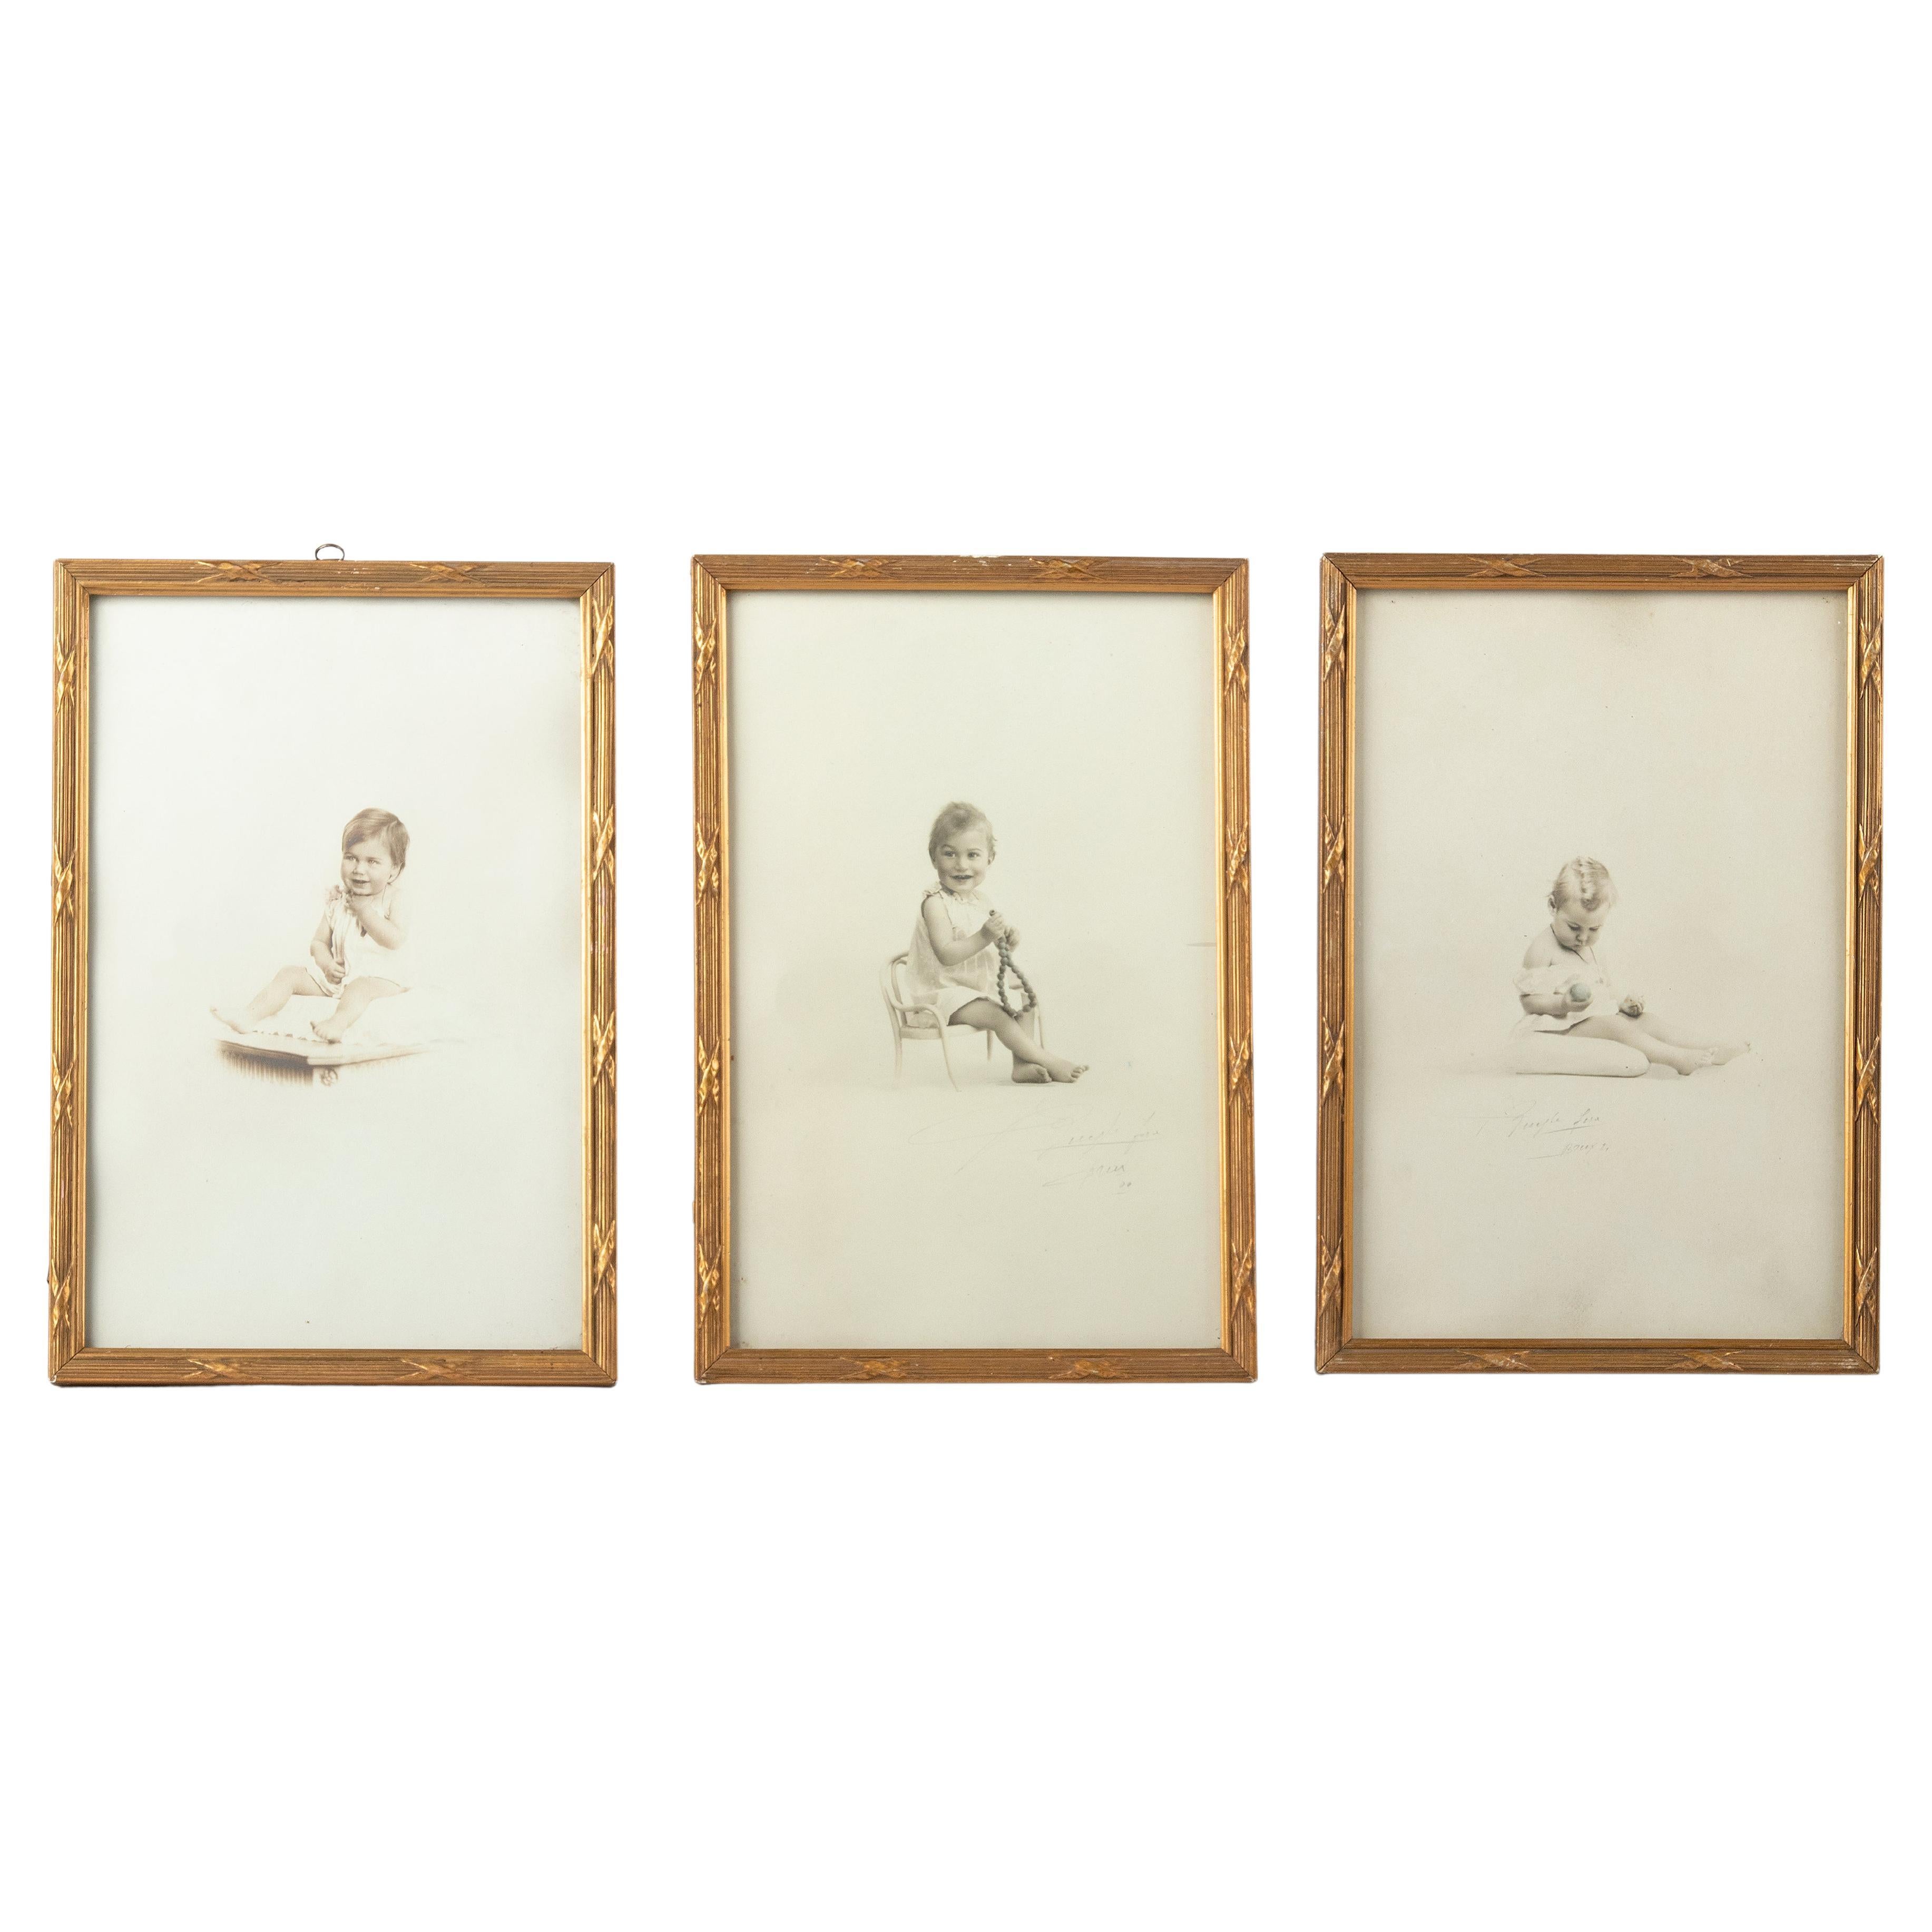 Set of 3 Early 20th Century Picture Frames in Louis XVI-Style